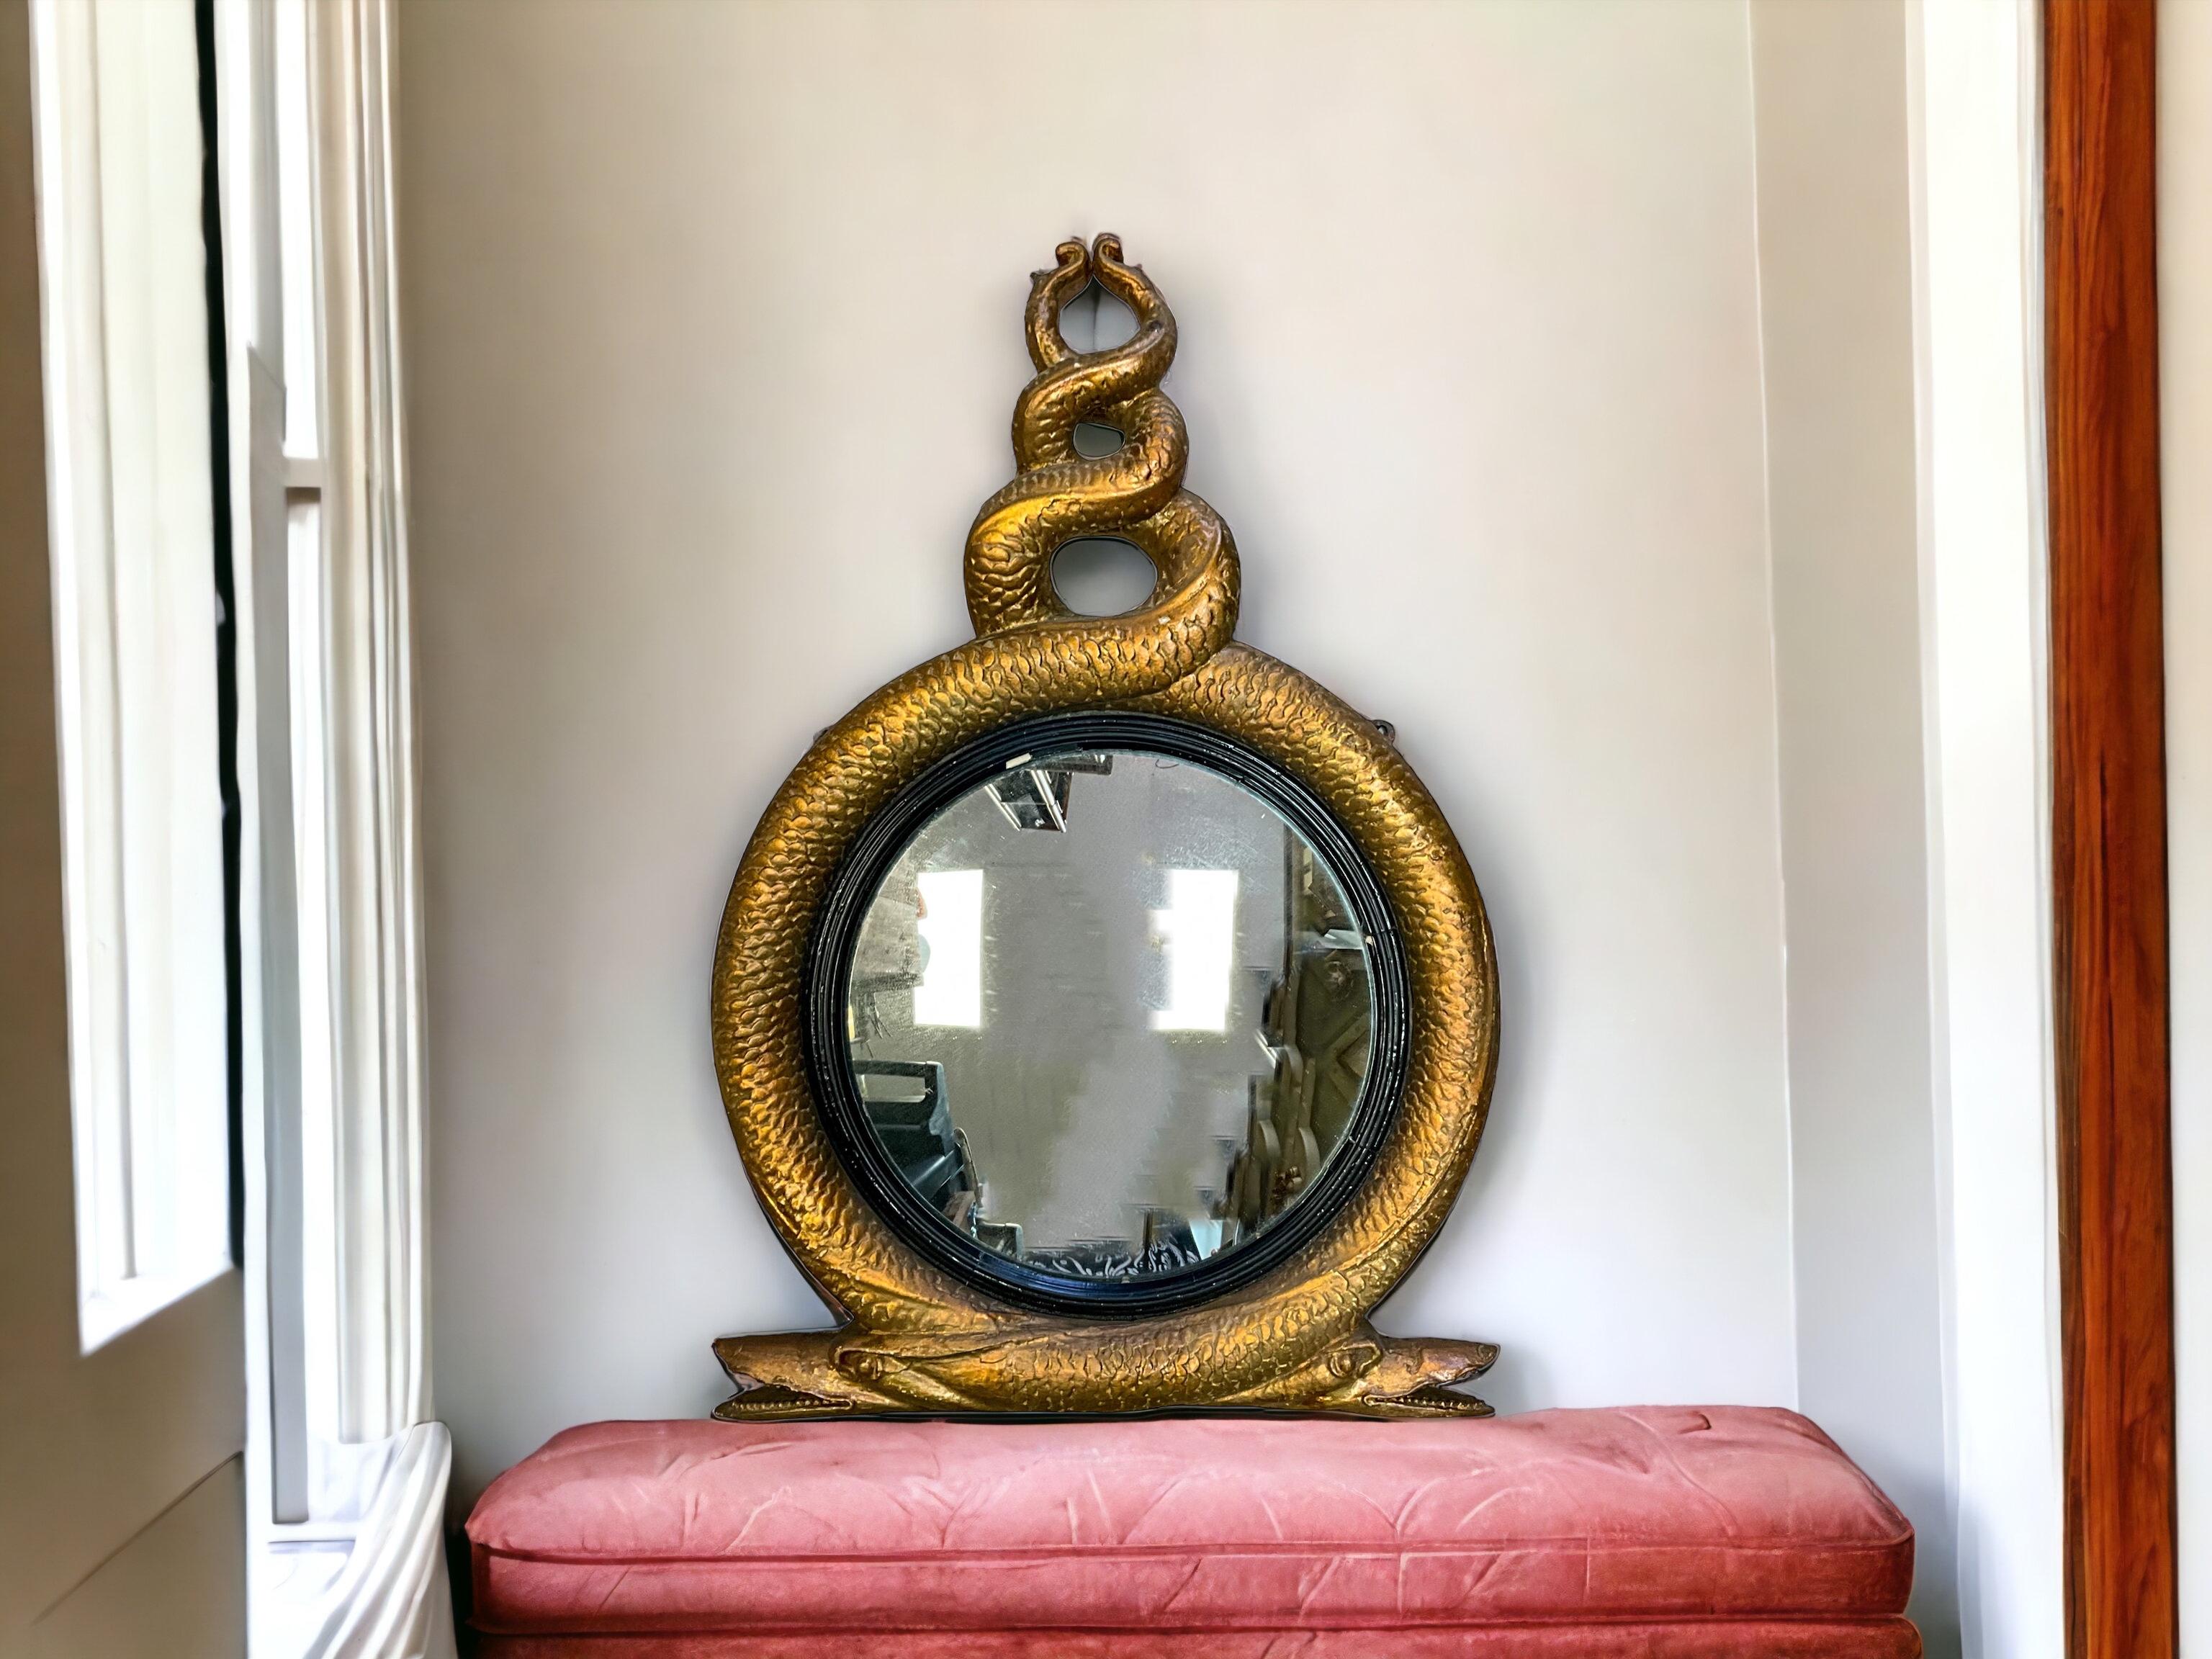 This is a show stopper. This is an early 19th century English Regency era gesso over giltwood convex mirror with intertwined eels. It has had restoration over time but is a really unique mirror. The glass is framed by ebonized wood. The mirror is in